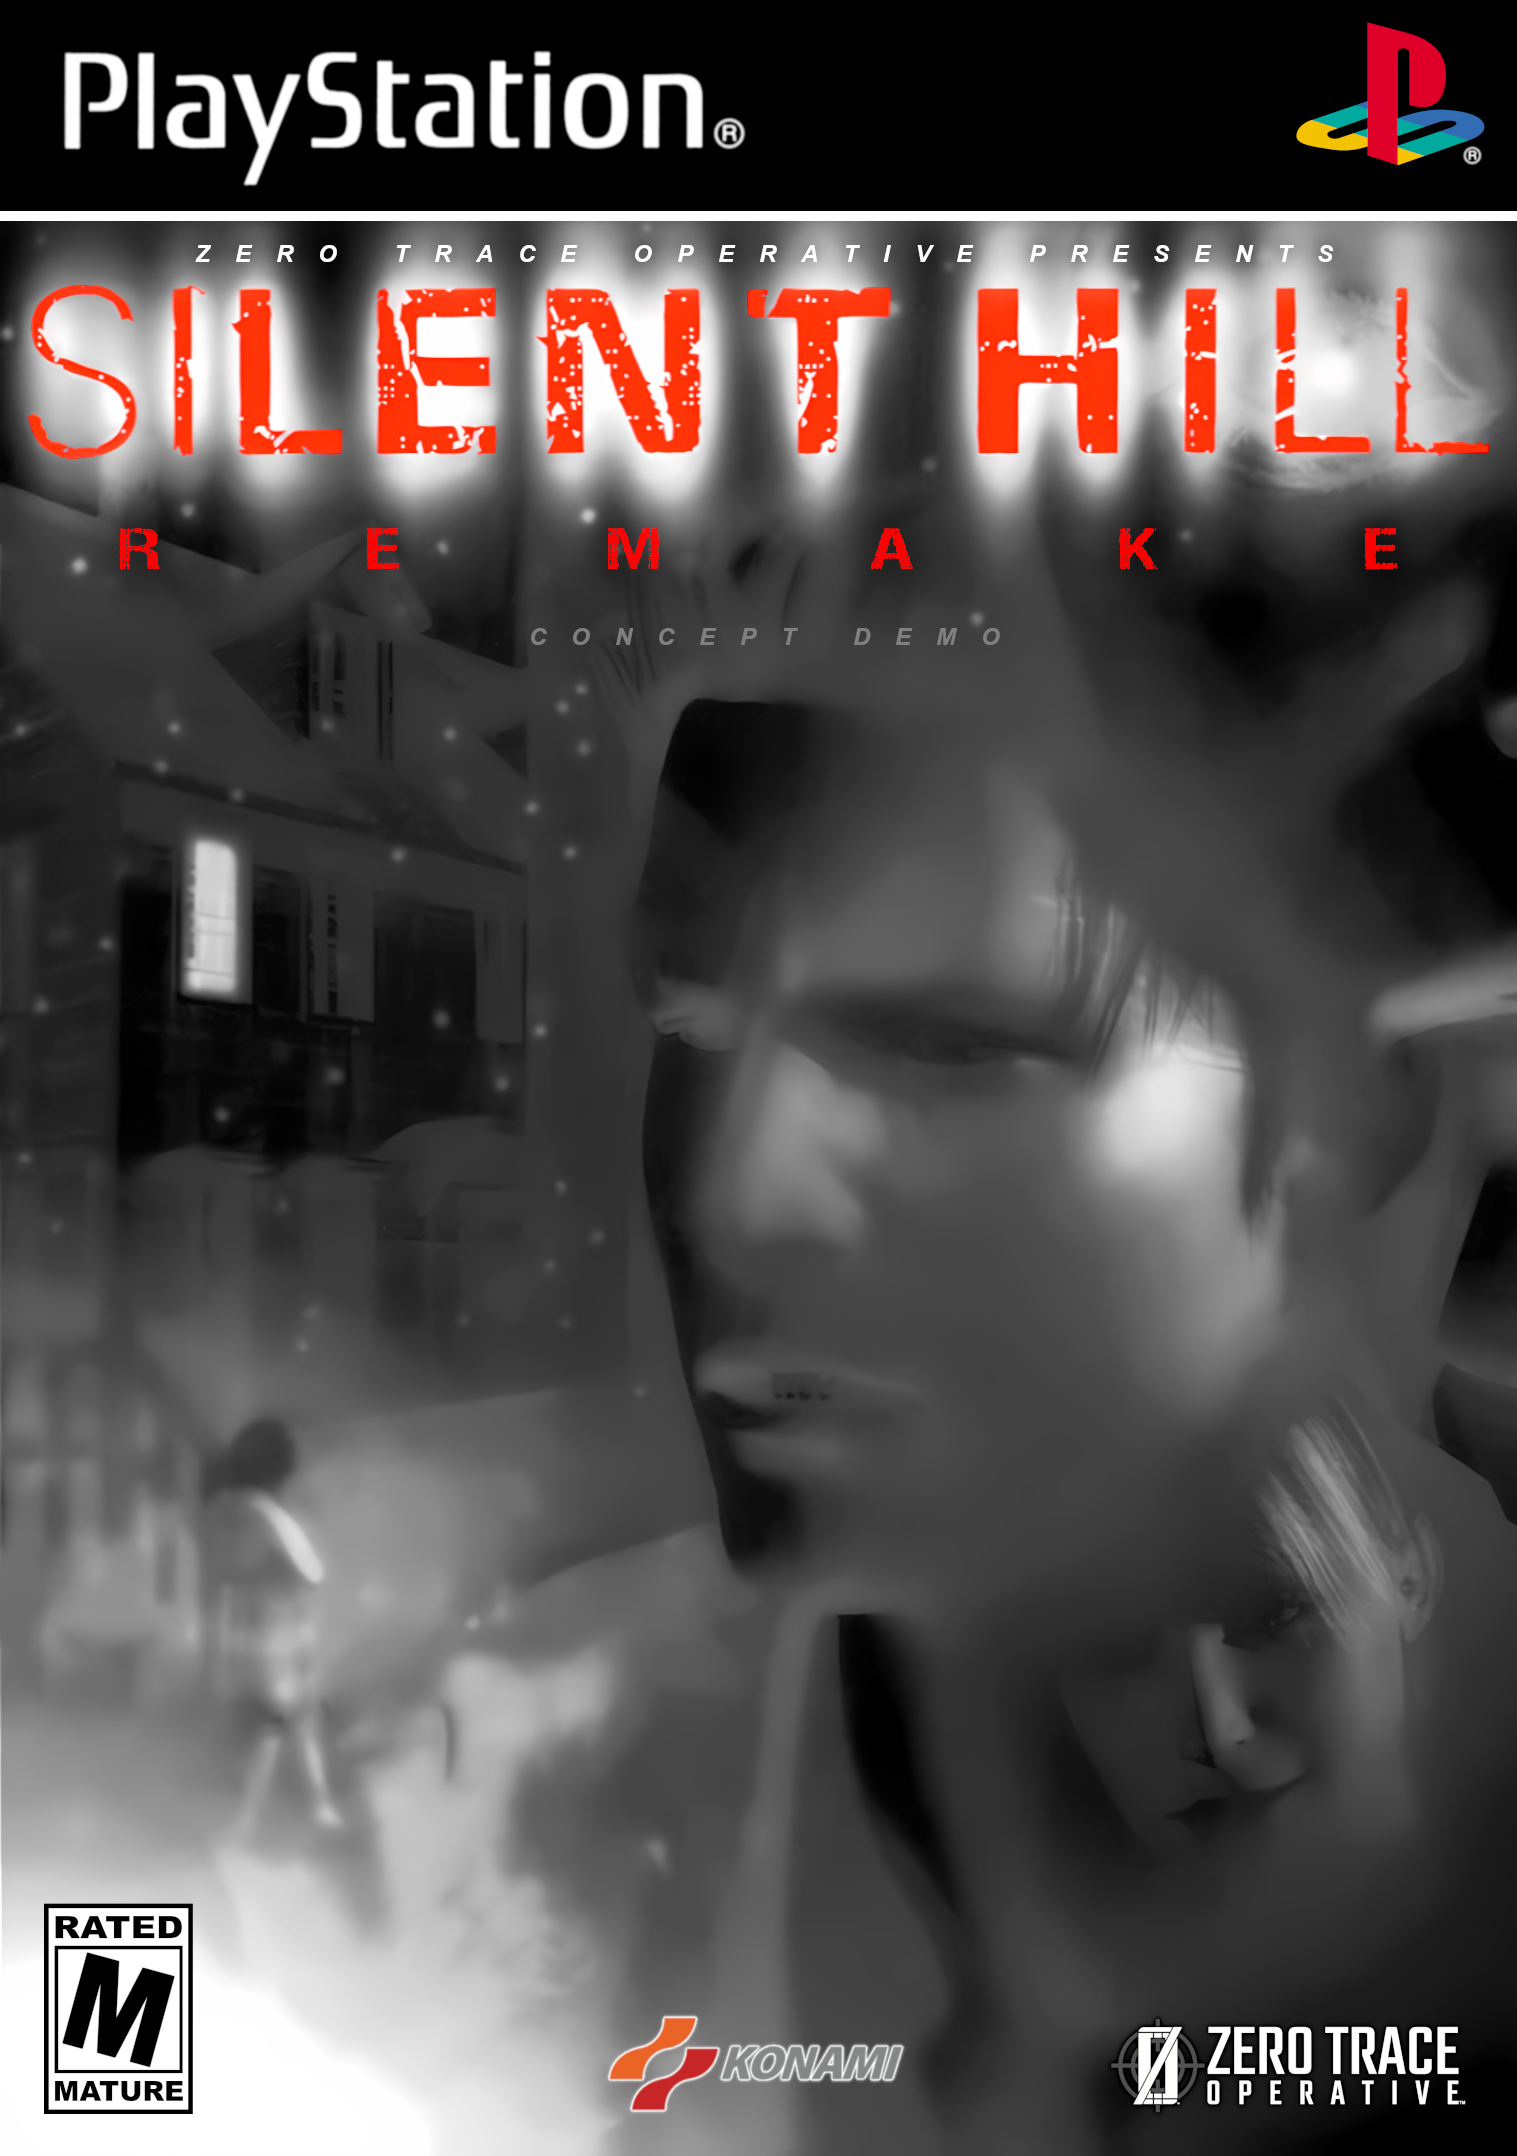 Free Demo for Silent Hope Available Now